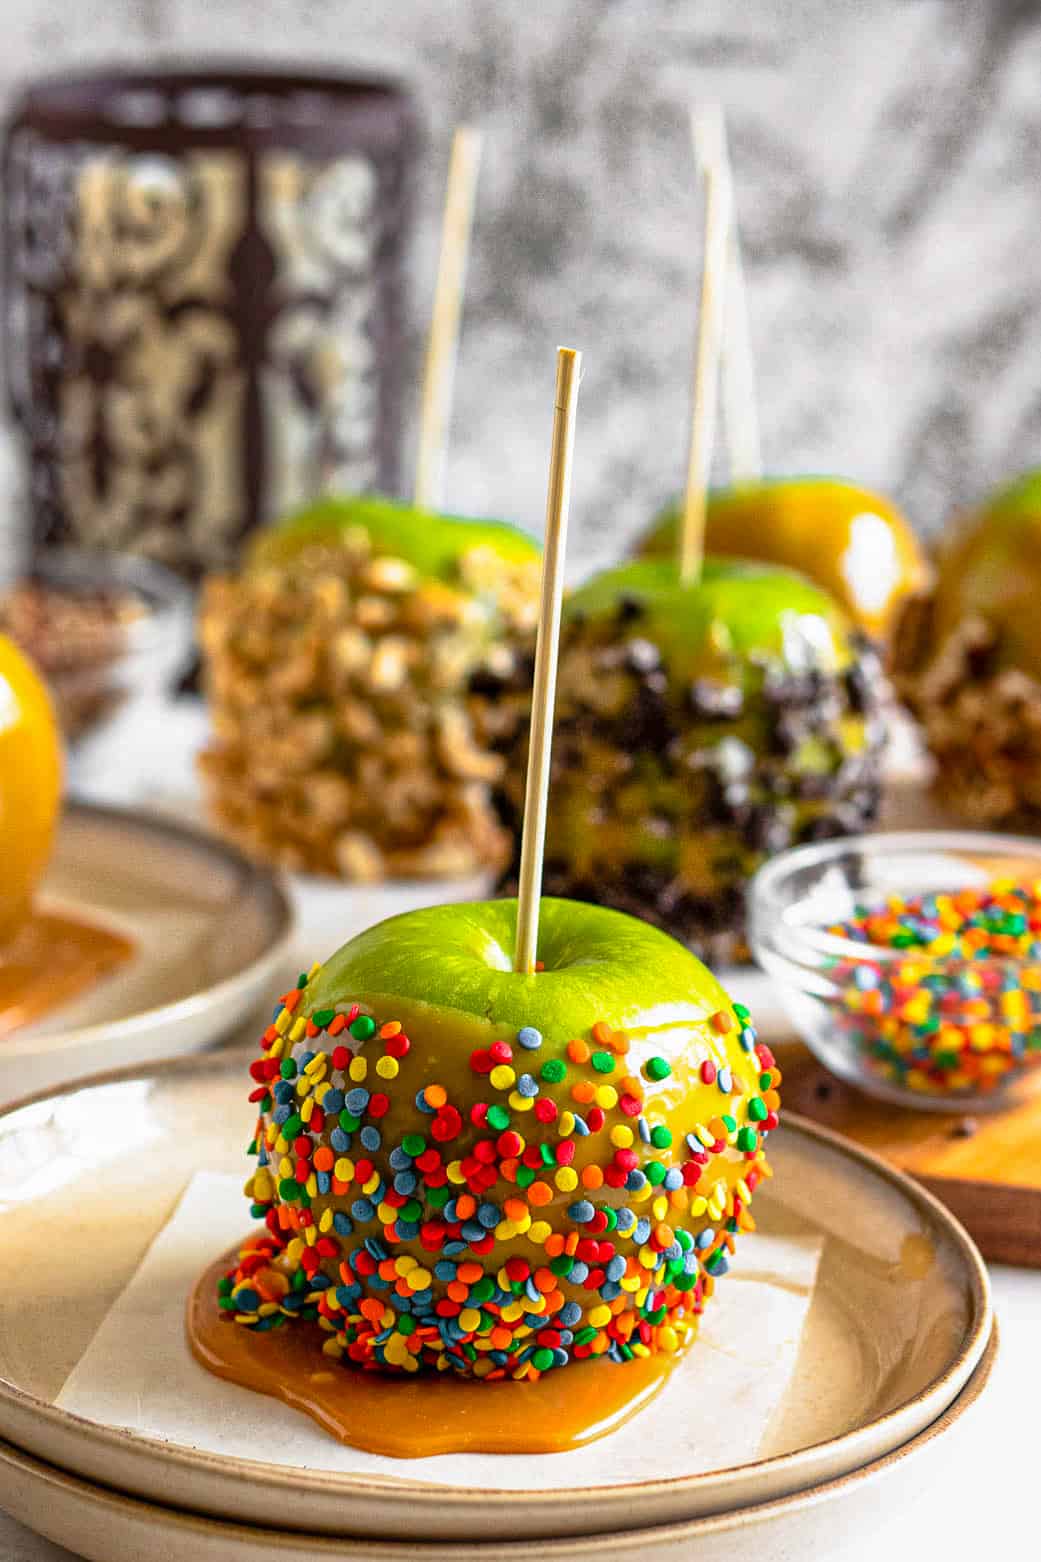 caramel apples on serving tray